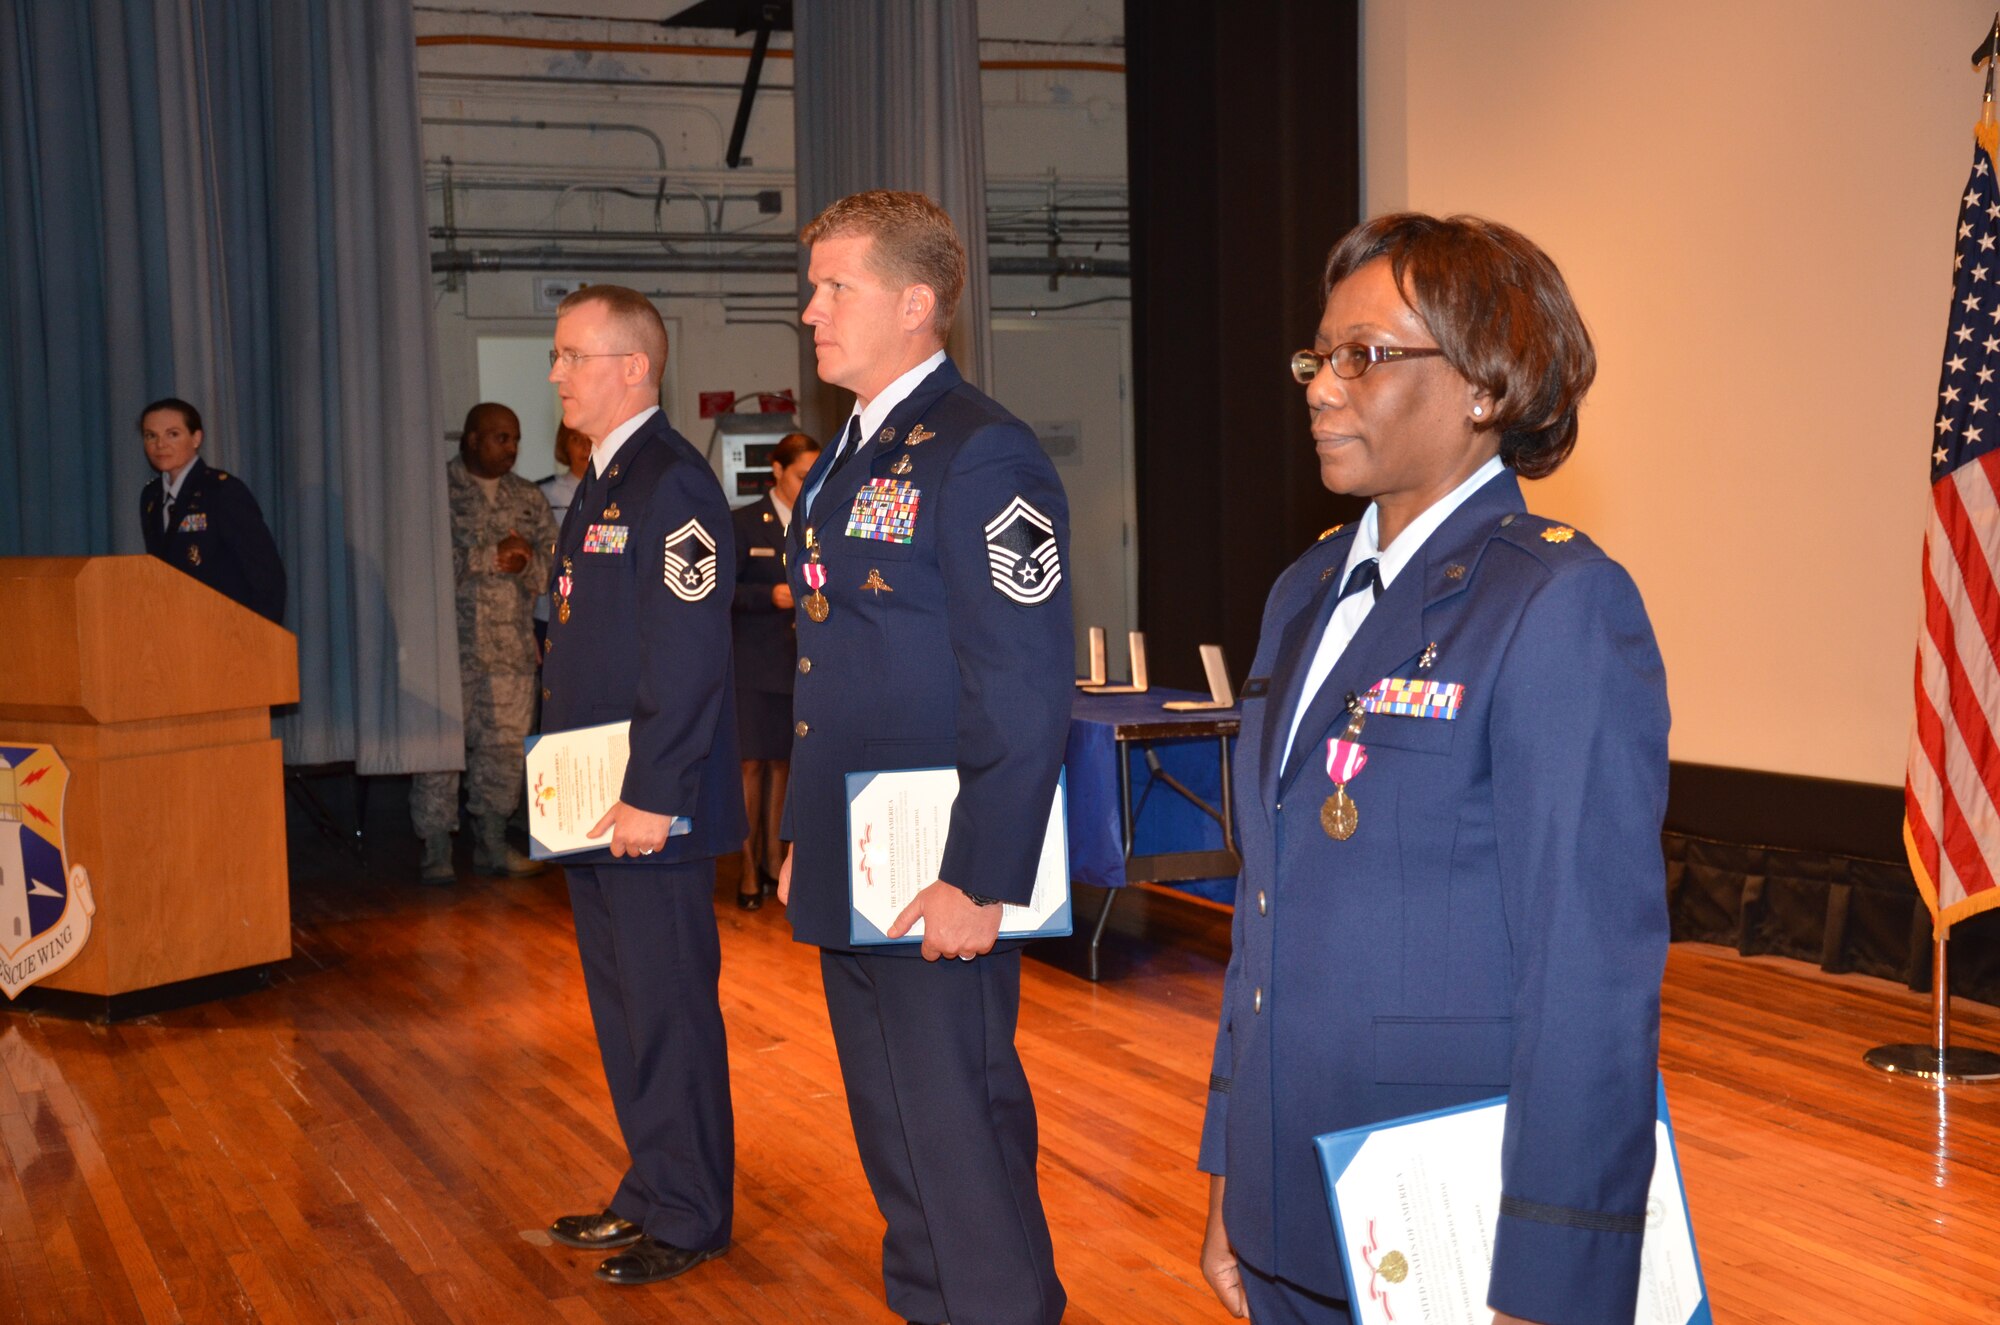 PATRICK AIR FORCE BASE, Fla.- Senior Master Sgts. Odean Lebahn, Michael Ziegler and Maj. Margaret Poole stand before their fellow Airmen after being awarded medals by the wing commander, Col. Jeffrey Macrander. The 920th Rescue Wing trains and equips over 1,700 Airmen to locate and recover U.S. Armed Forces personnel during military operations. (U.S. Air Force photo/Capt. Ryan Liss)
